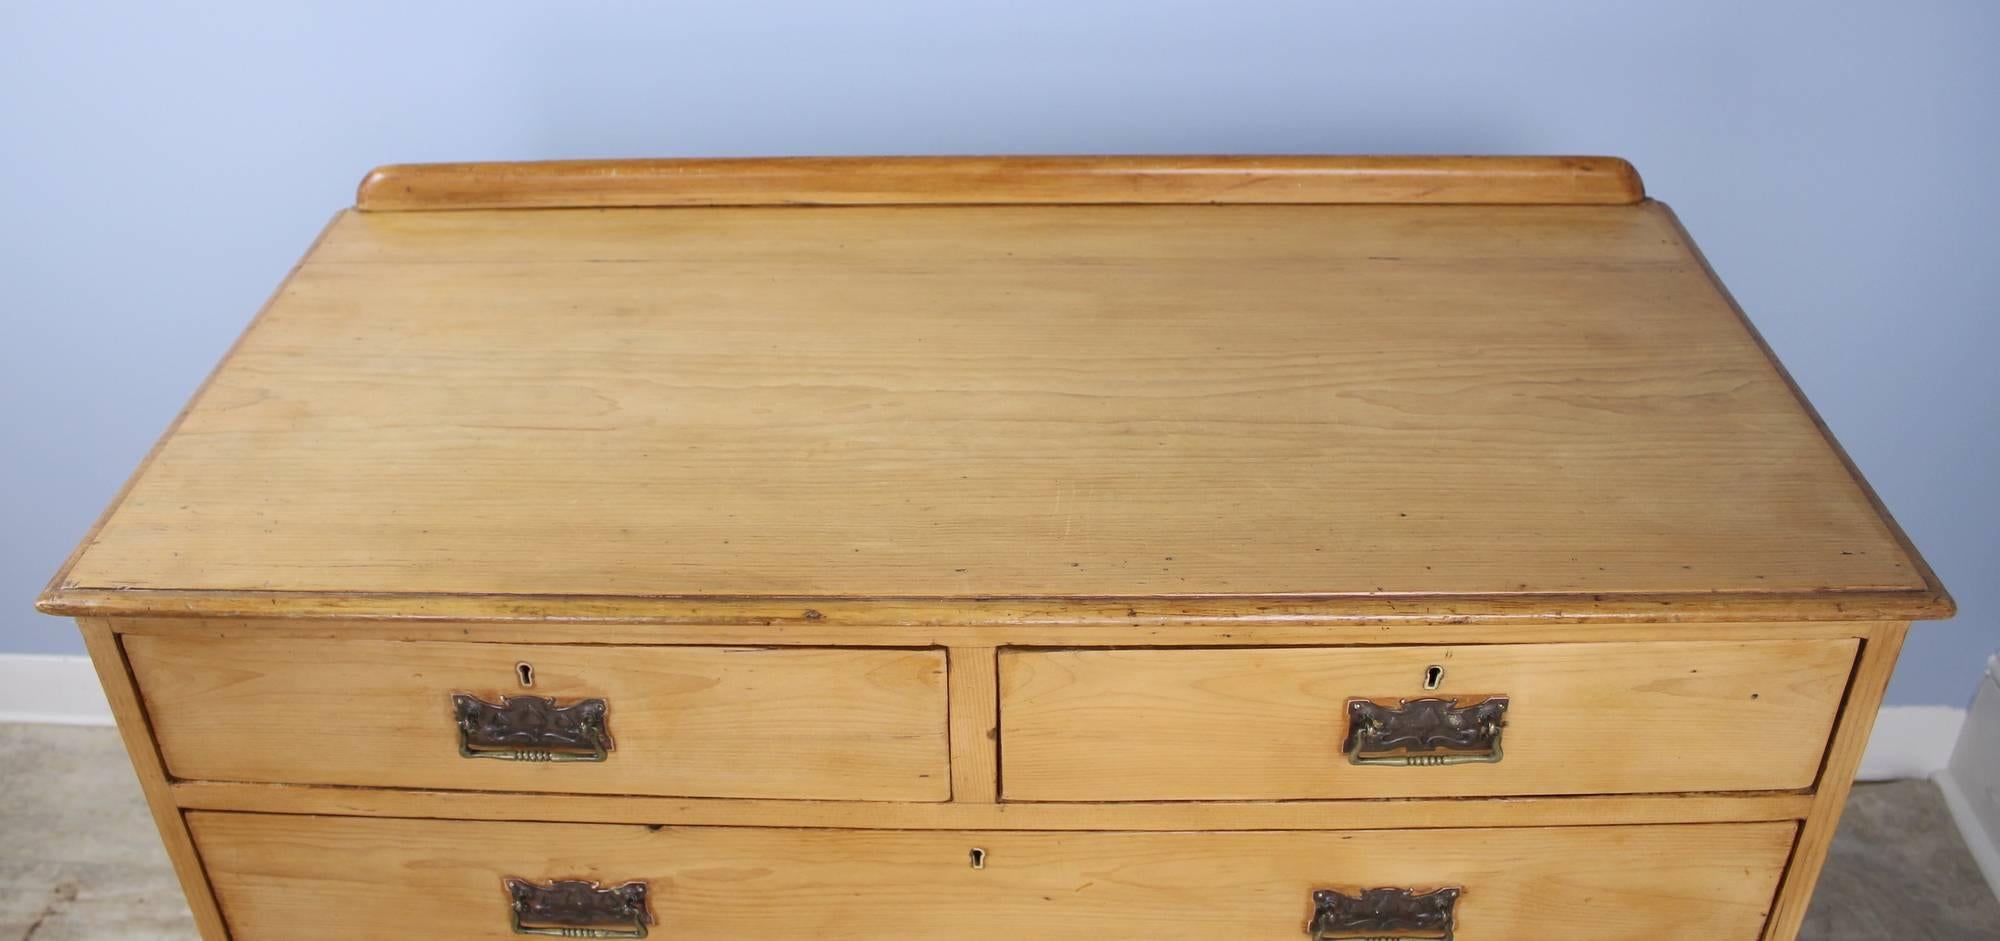 19th Century Antique English Pine Chest of Drawers with Decorative Pulls